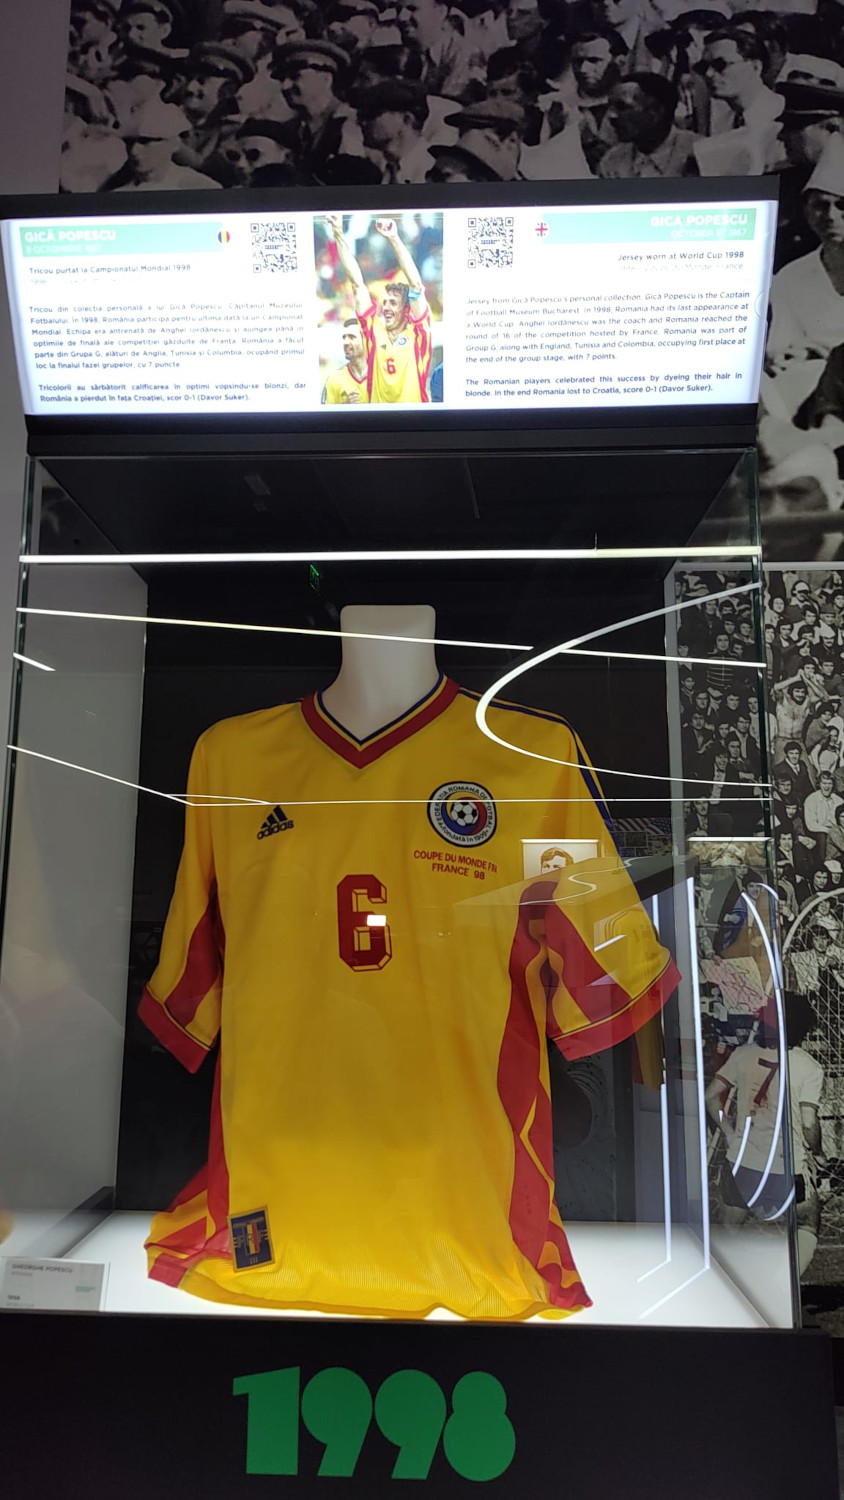 The Romanian Room at the Football Museum Bucharest - T-shirt worn at the World Cup